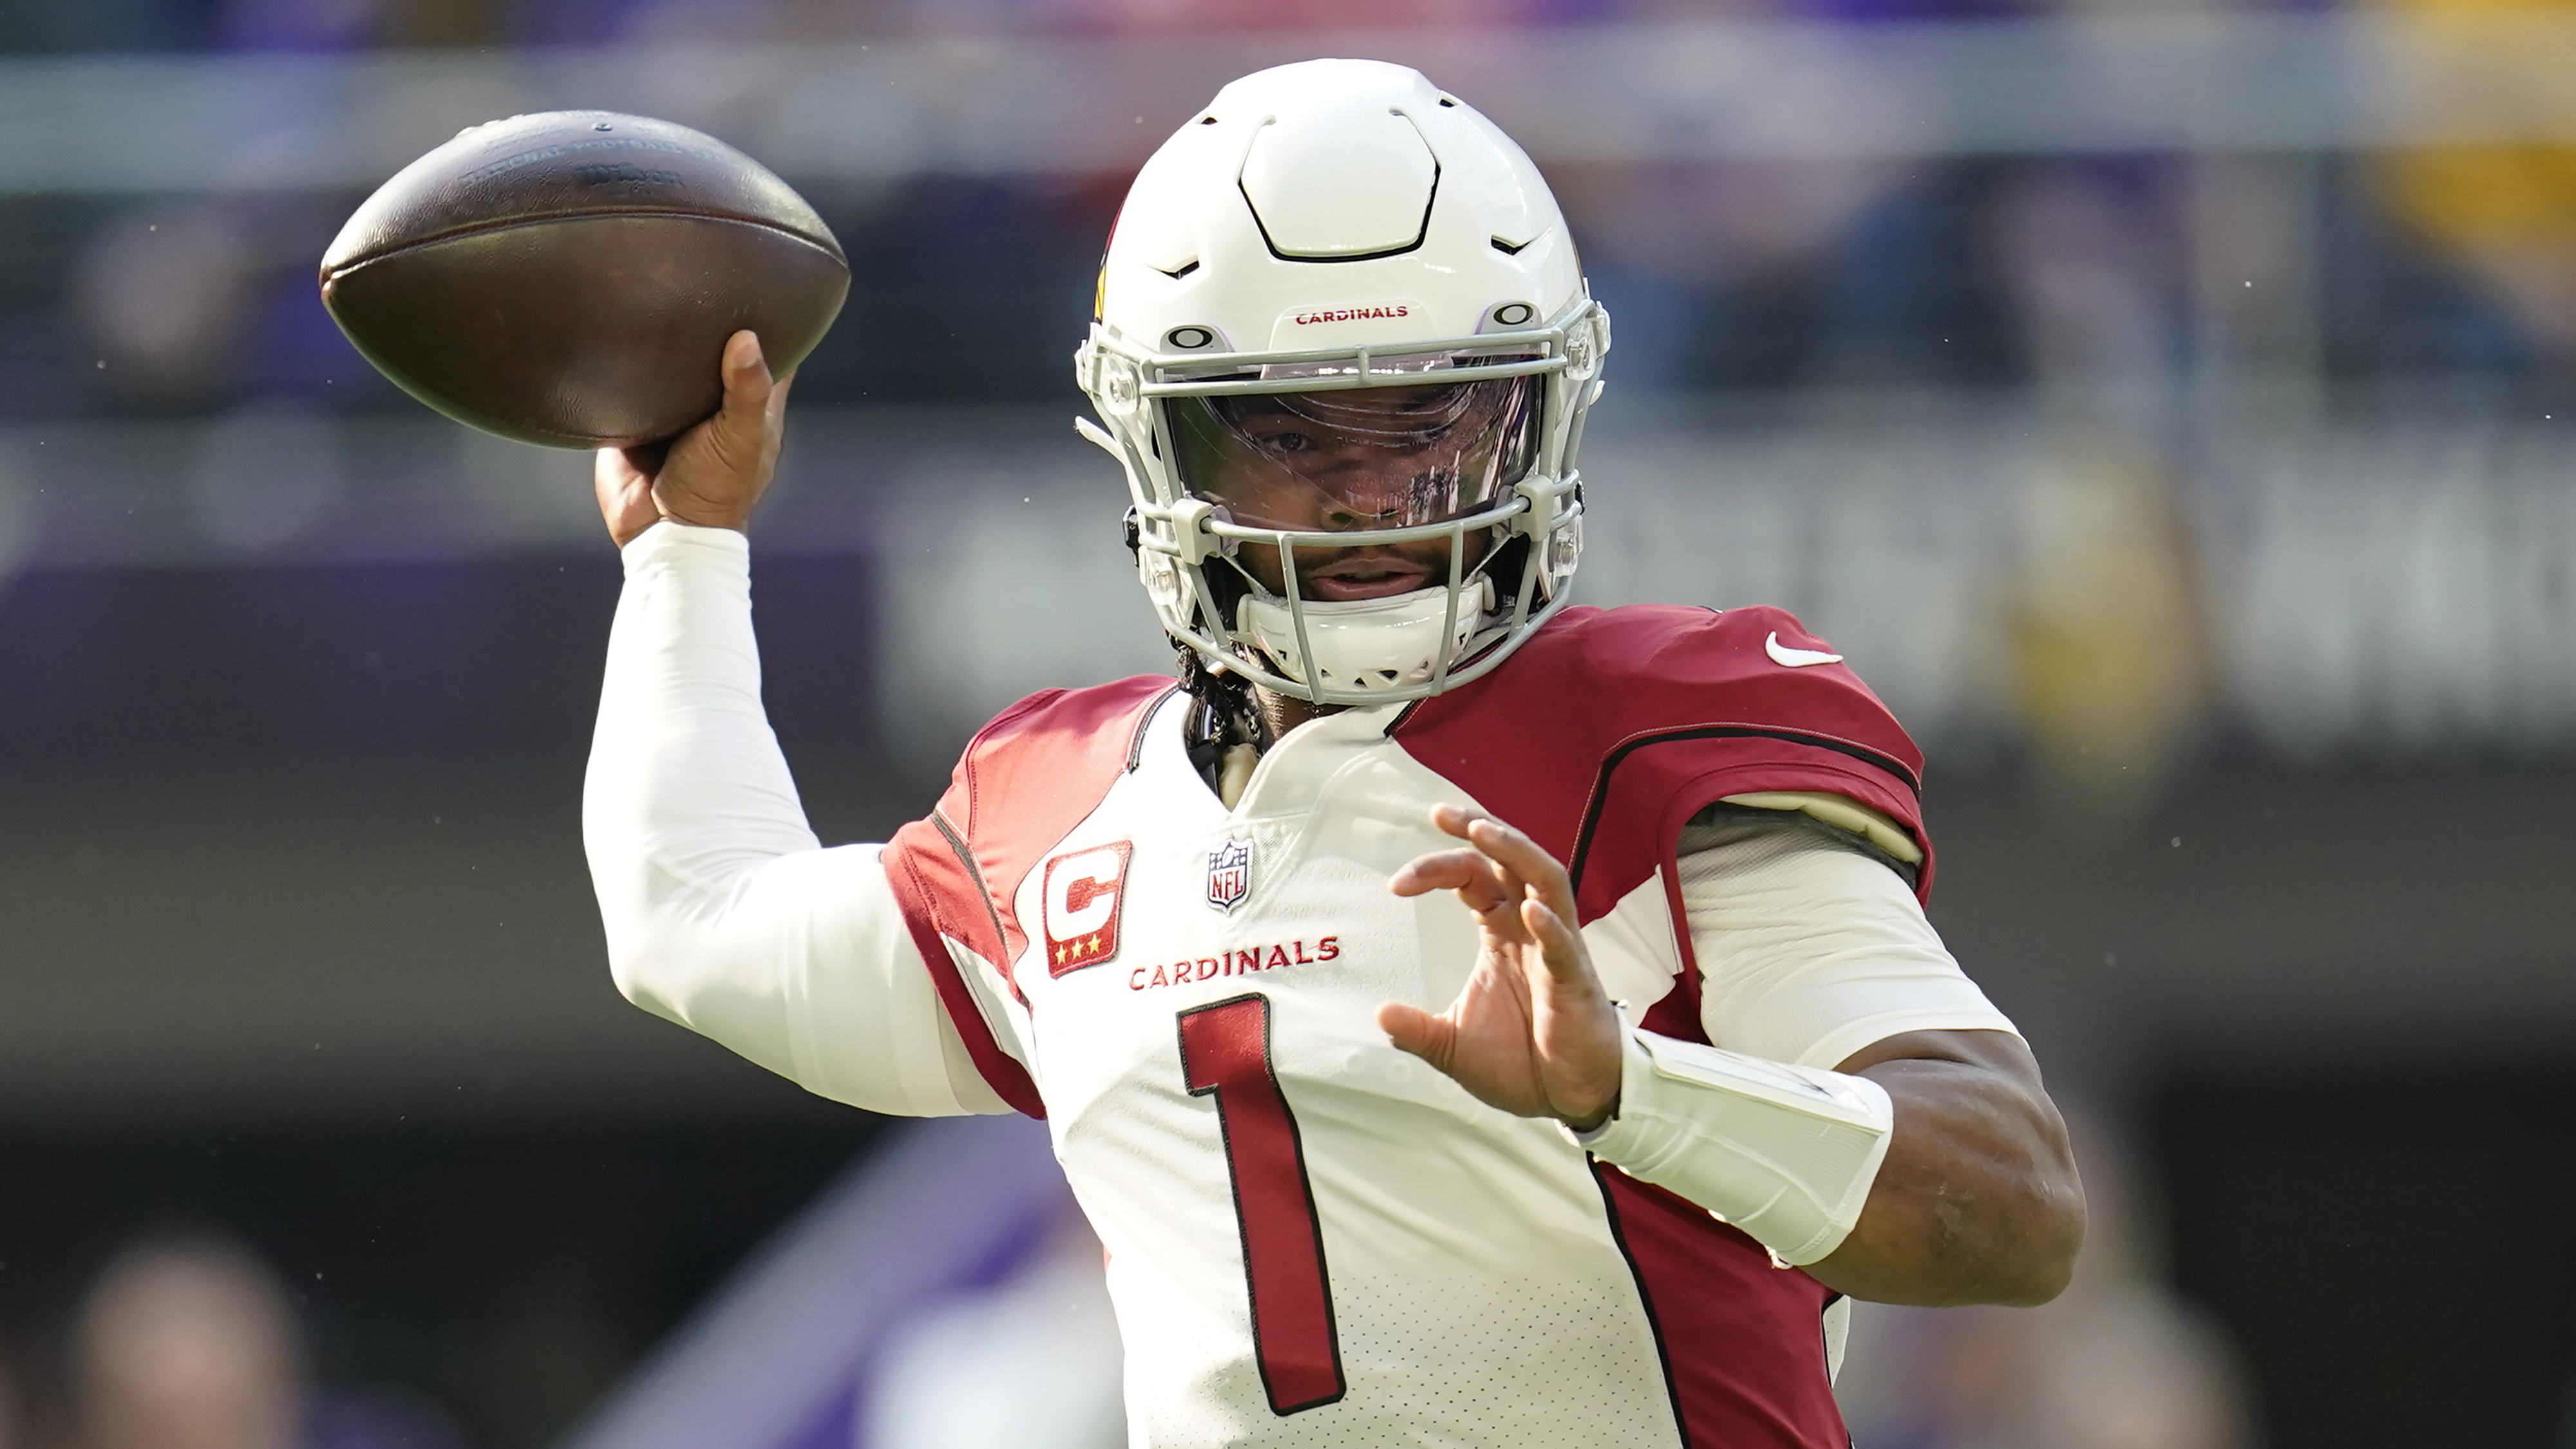 Kyler Murray is back at practice but what's his timetable look like? - PHNX